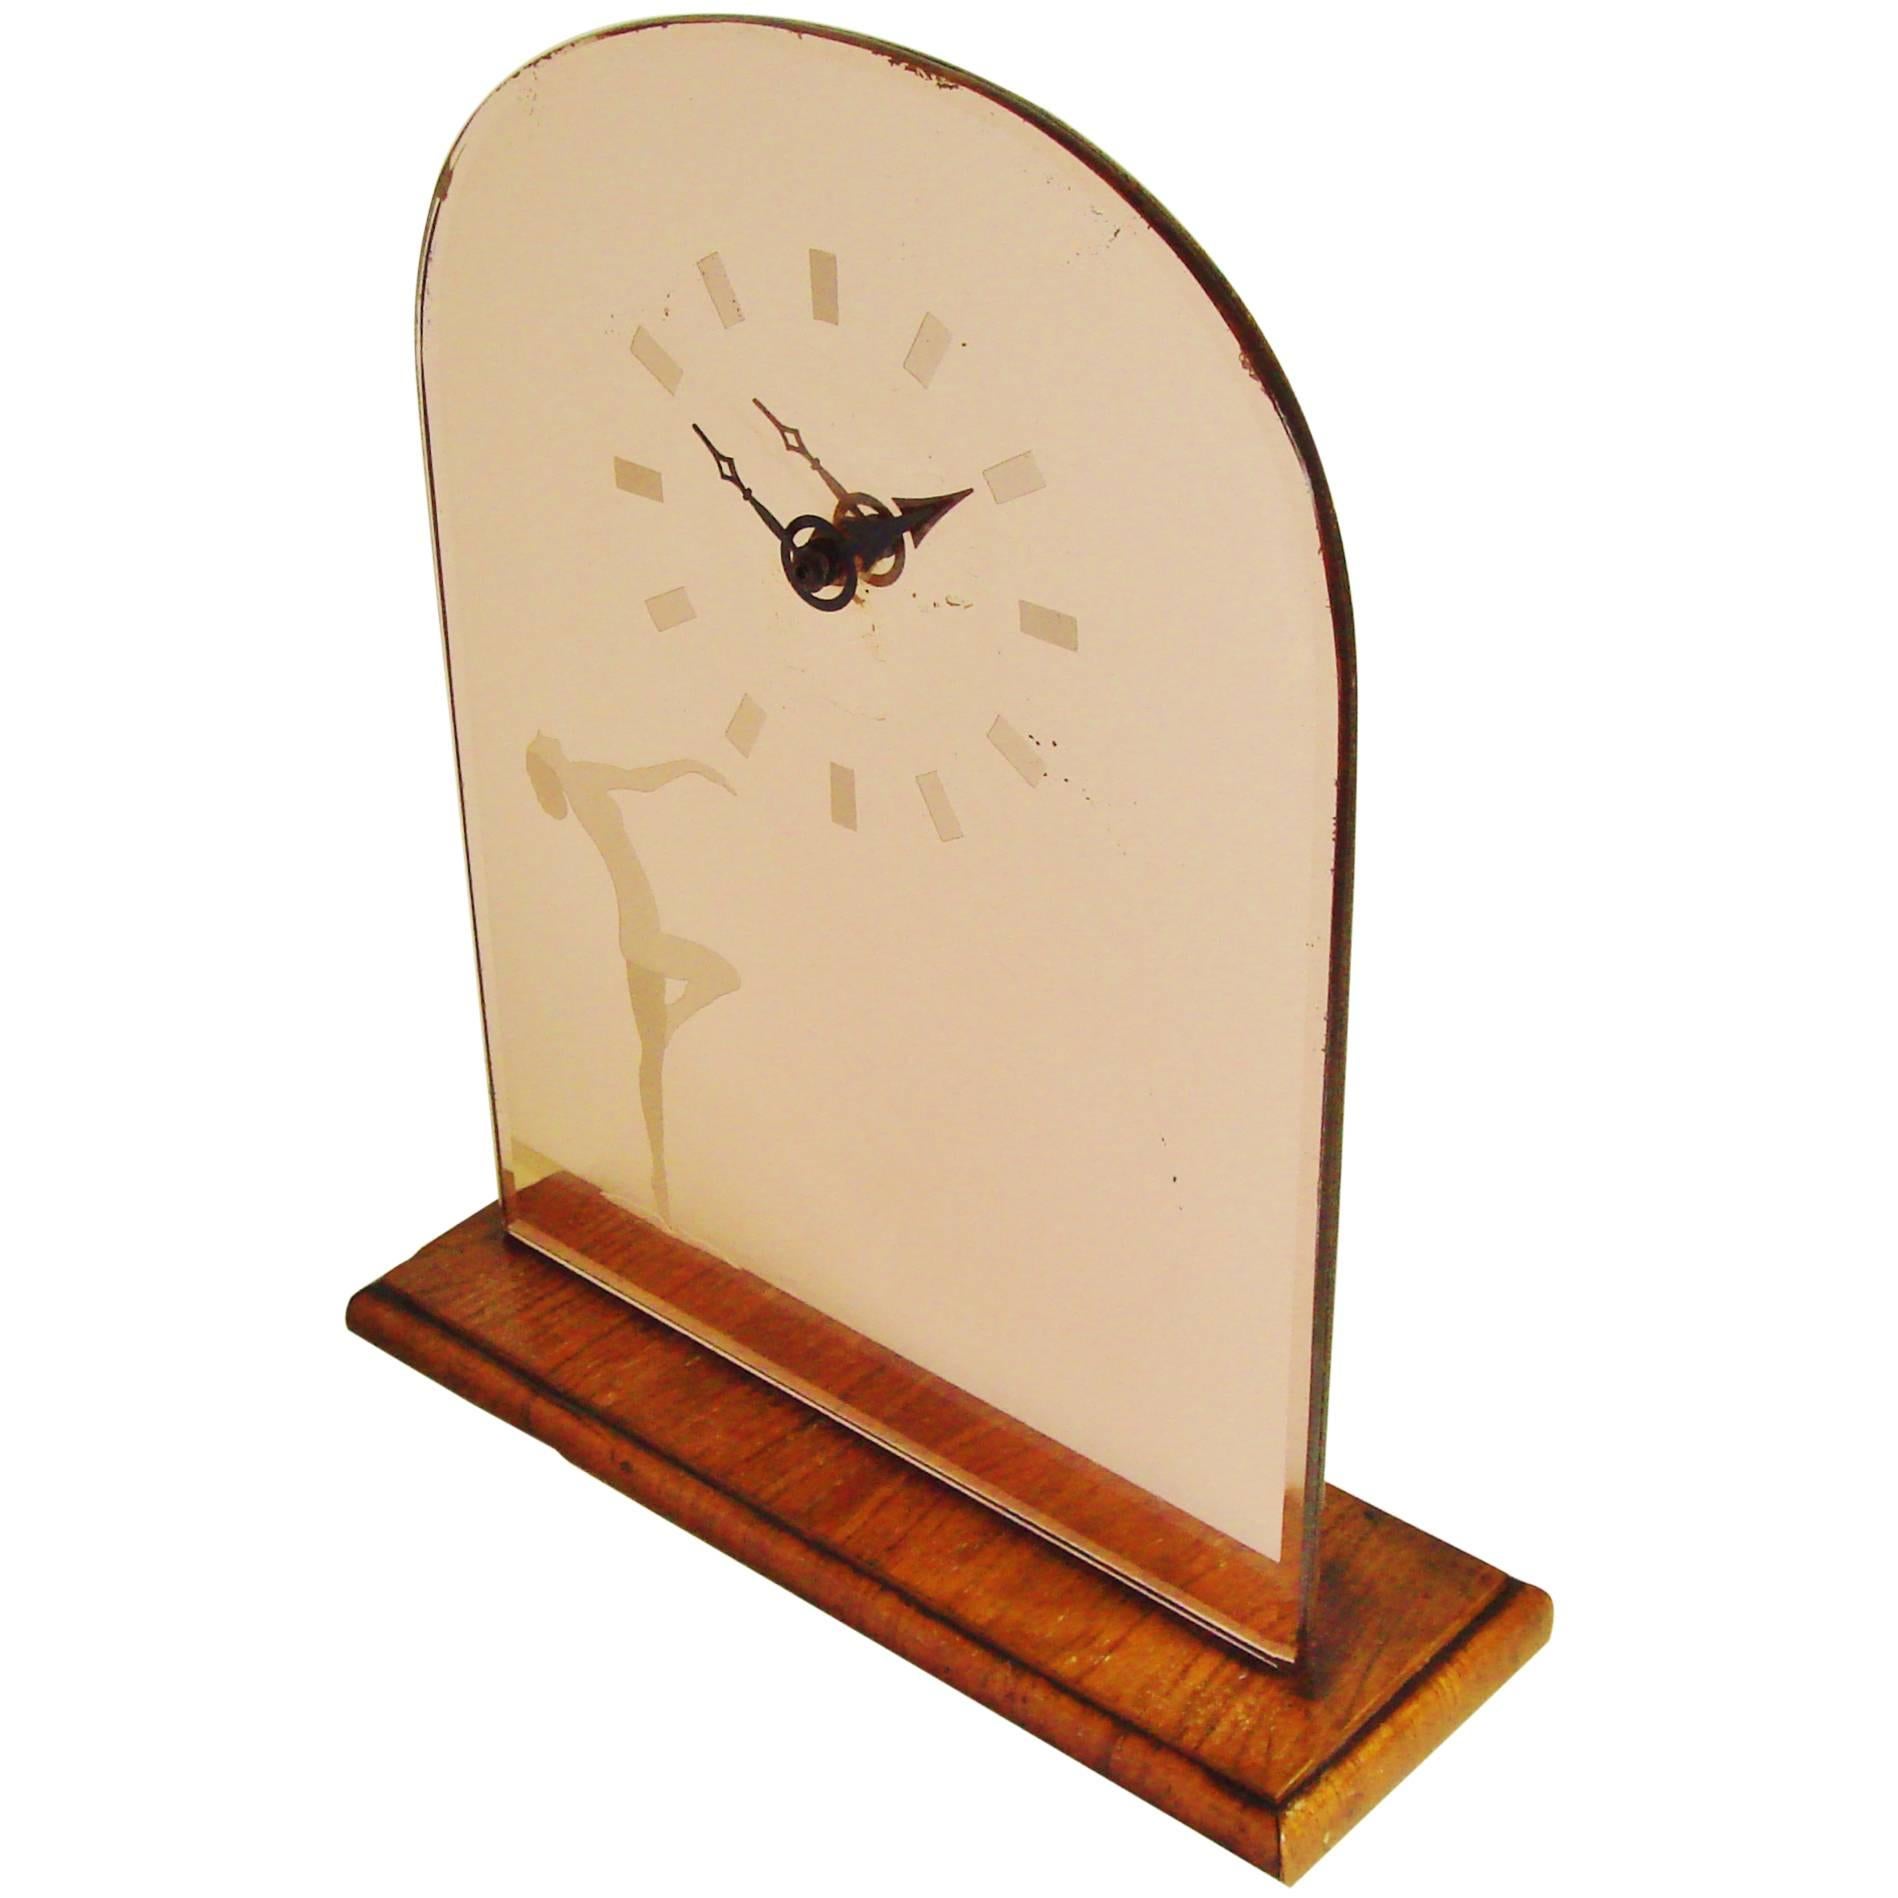 English Art Deco Wood & Peach Mirror Mantel Clock with Etched Nude & Numerals For Sale